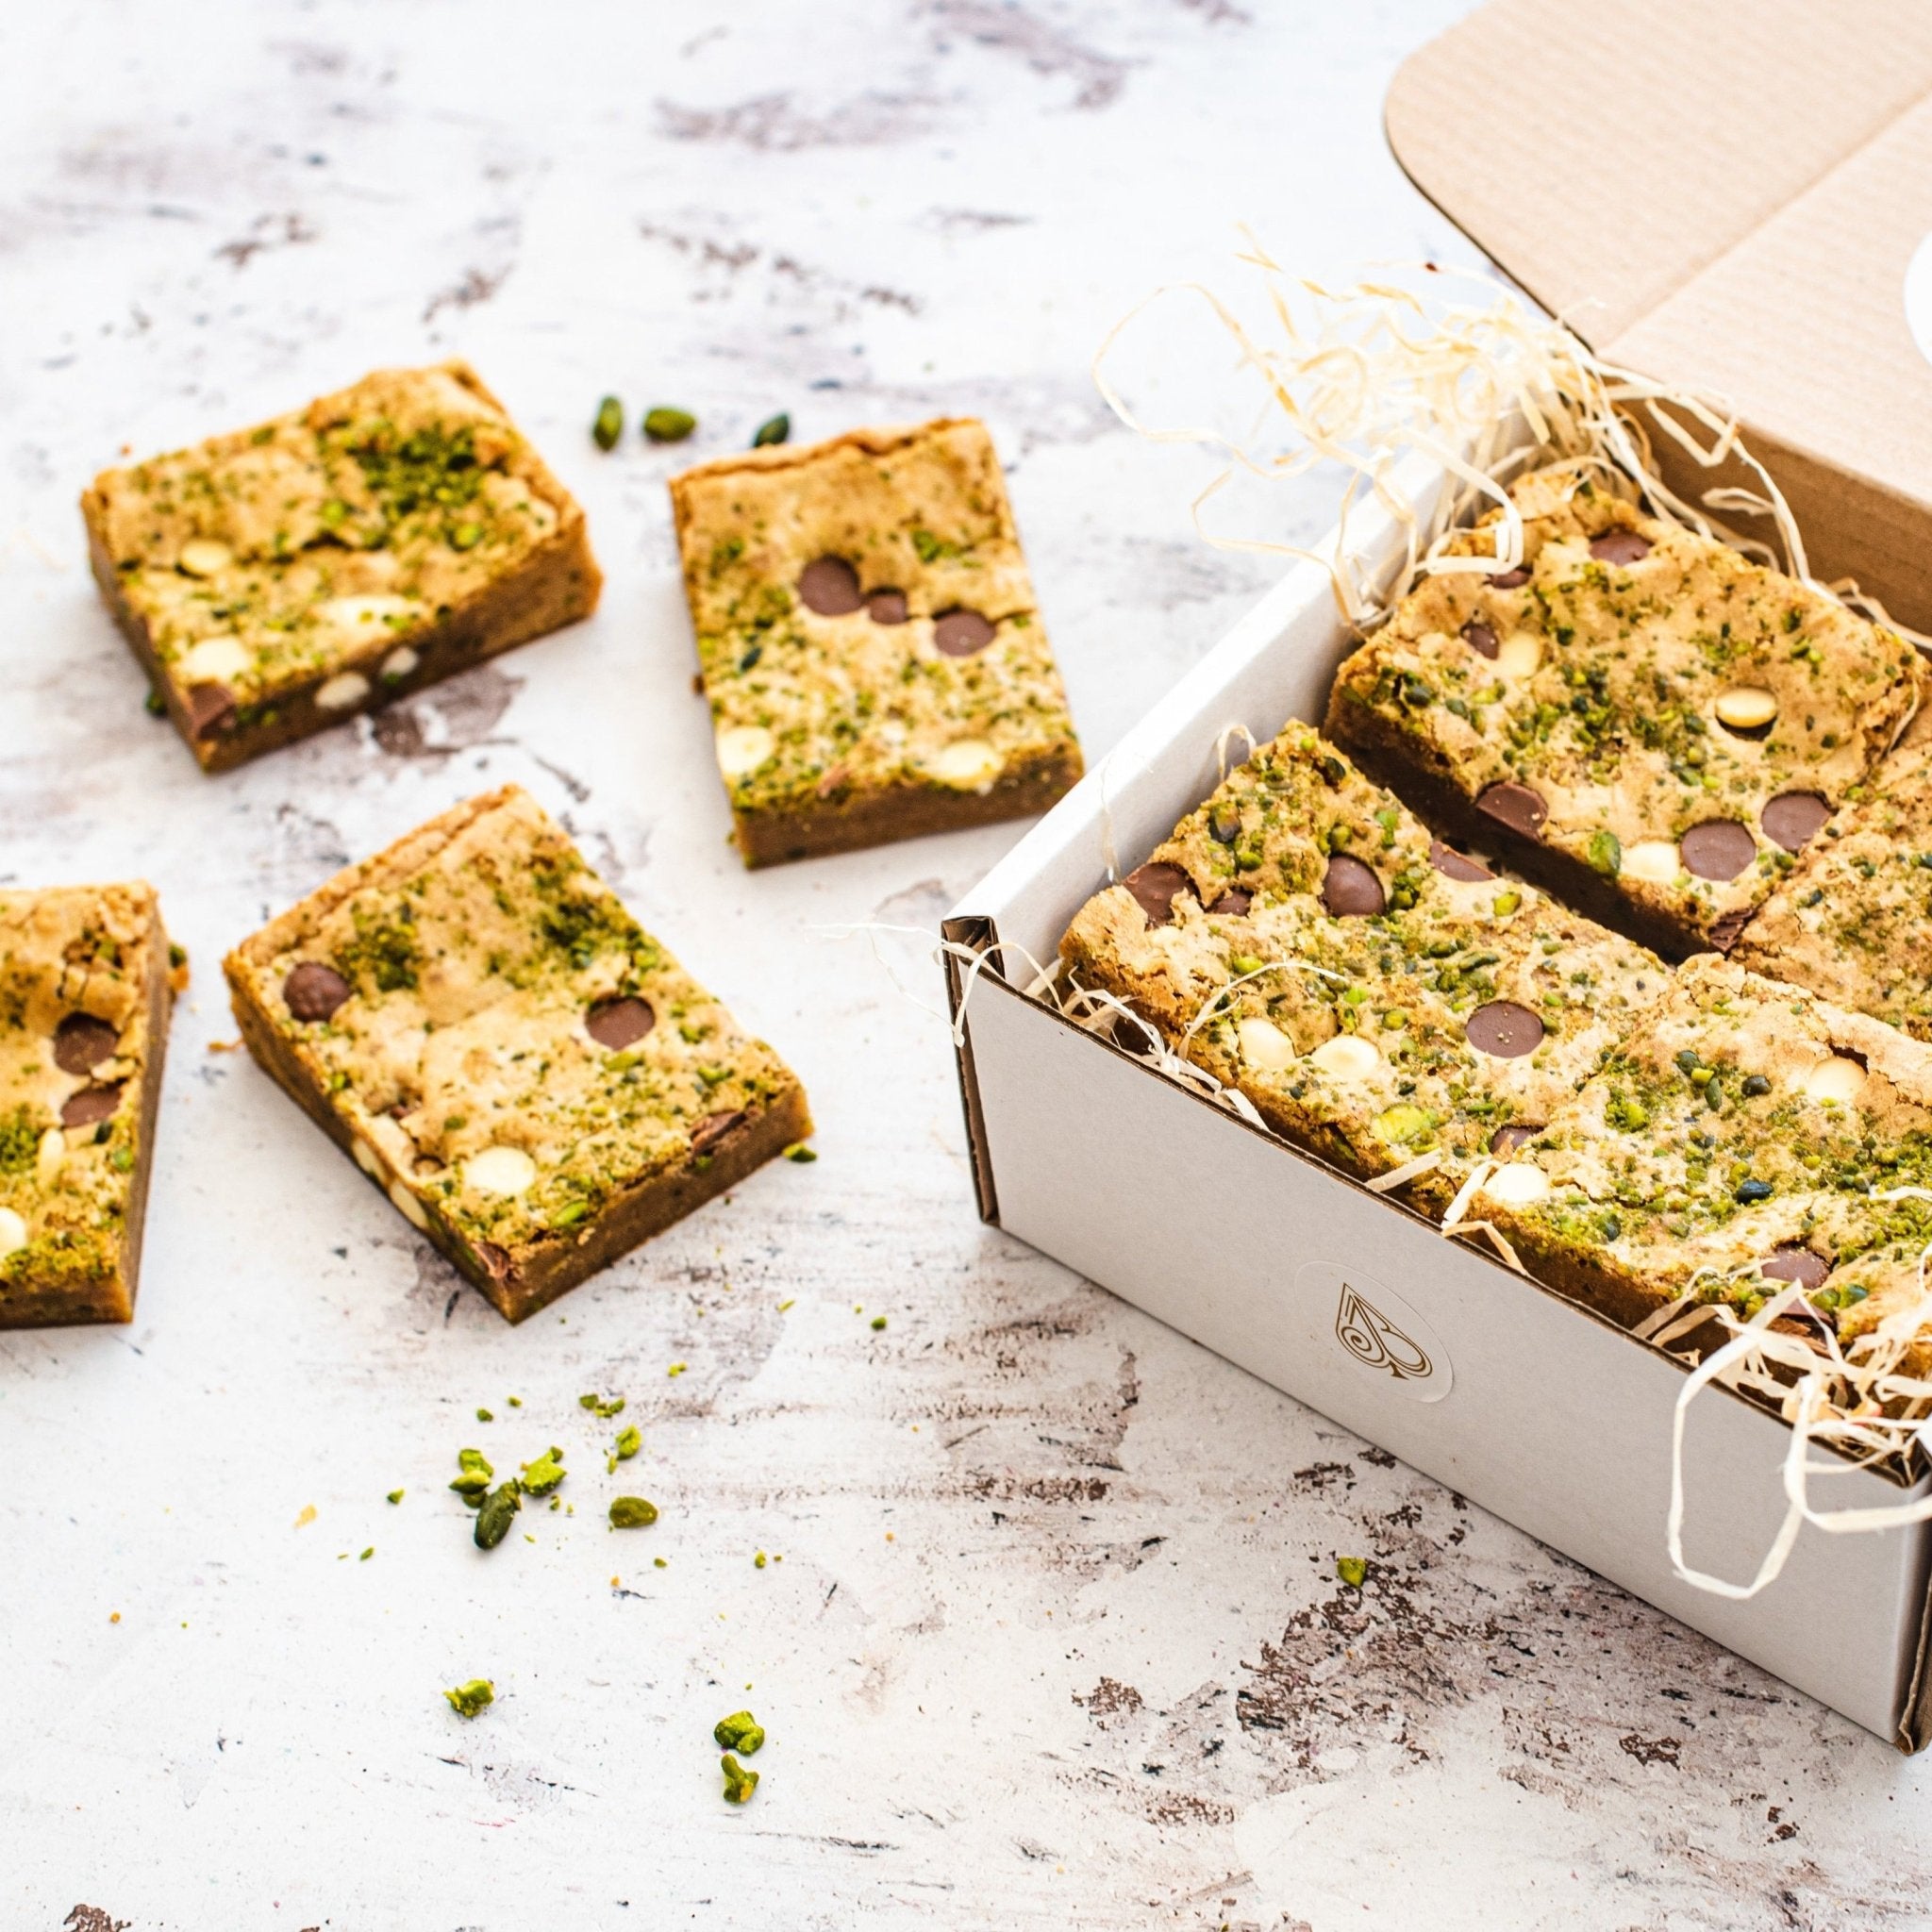 White Chocolate & Pistachio Blondie Box of 8 - Jack and Beyond